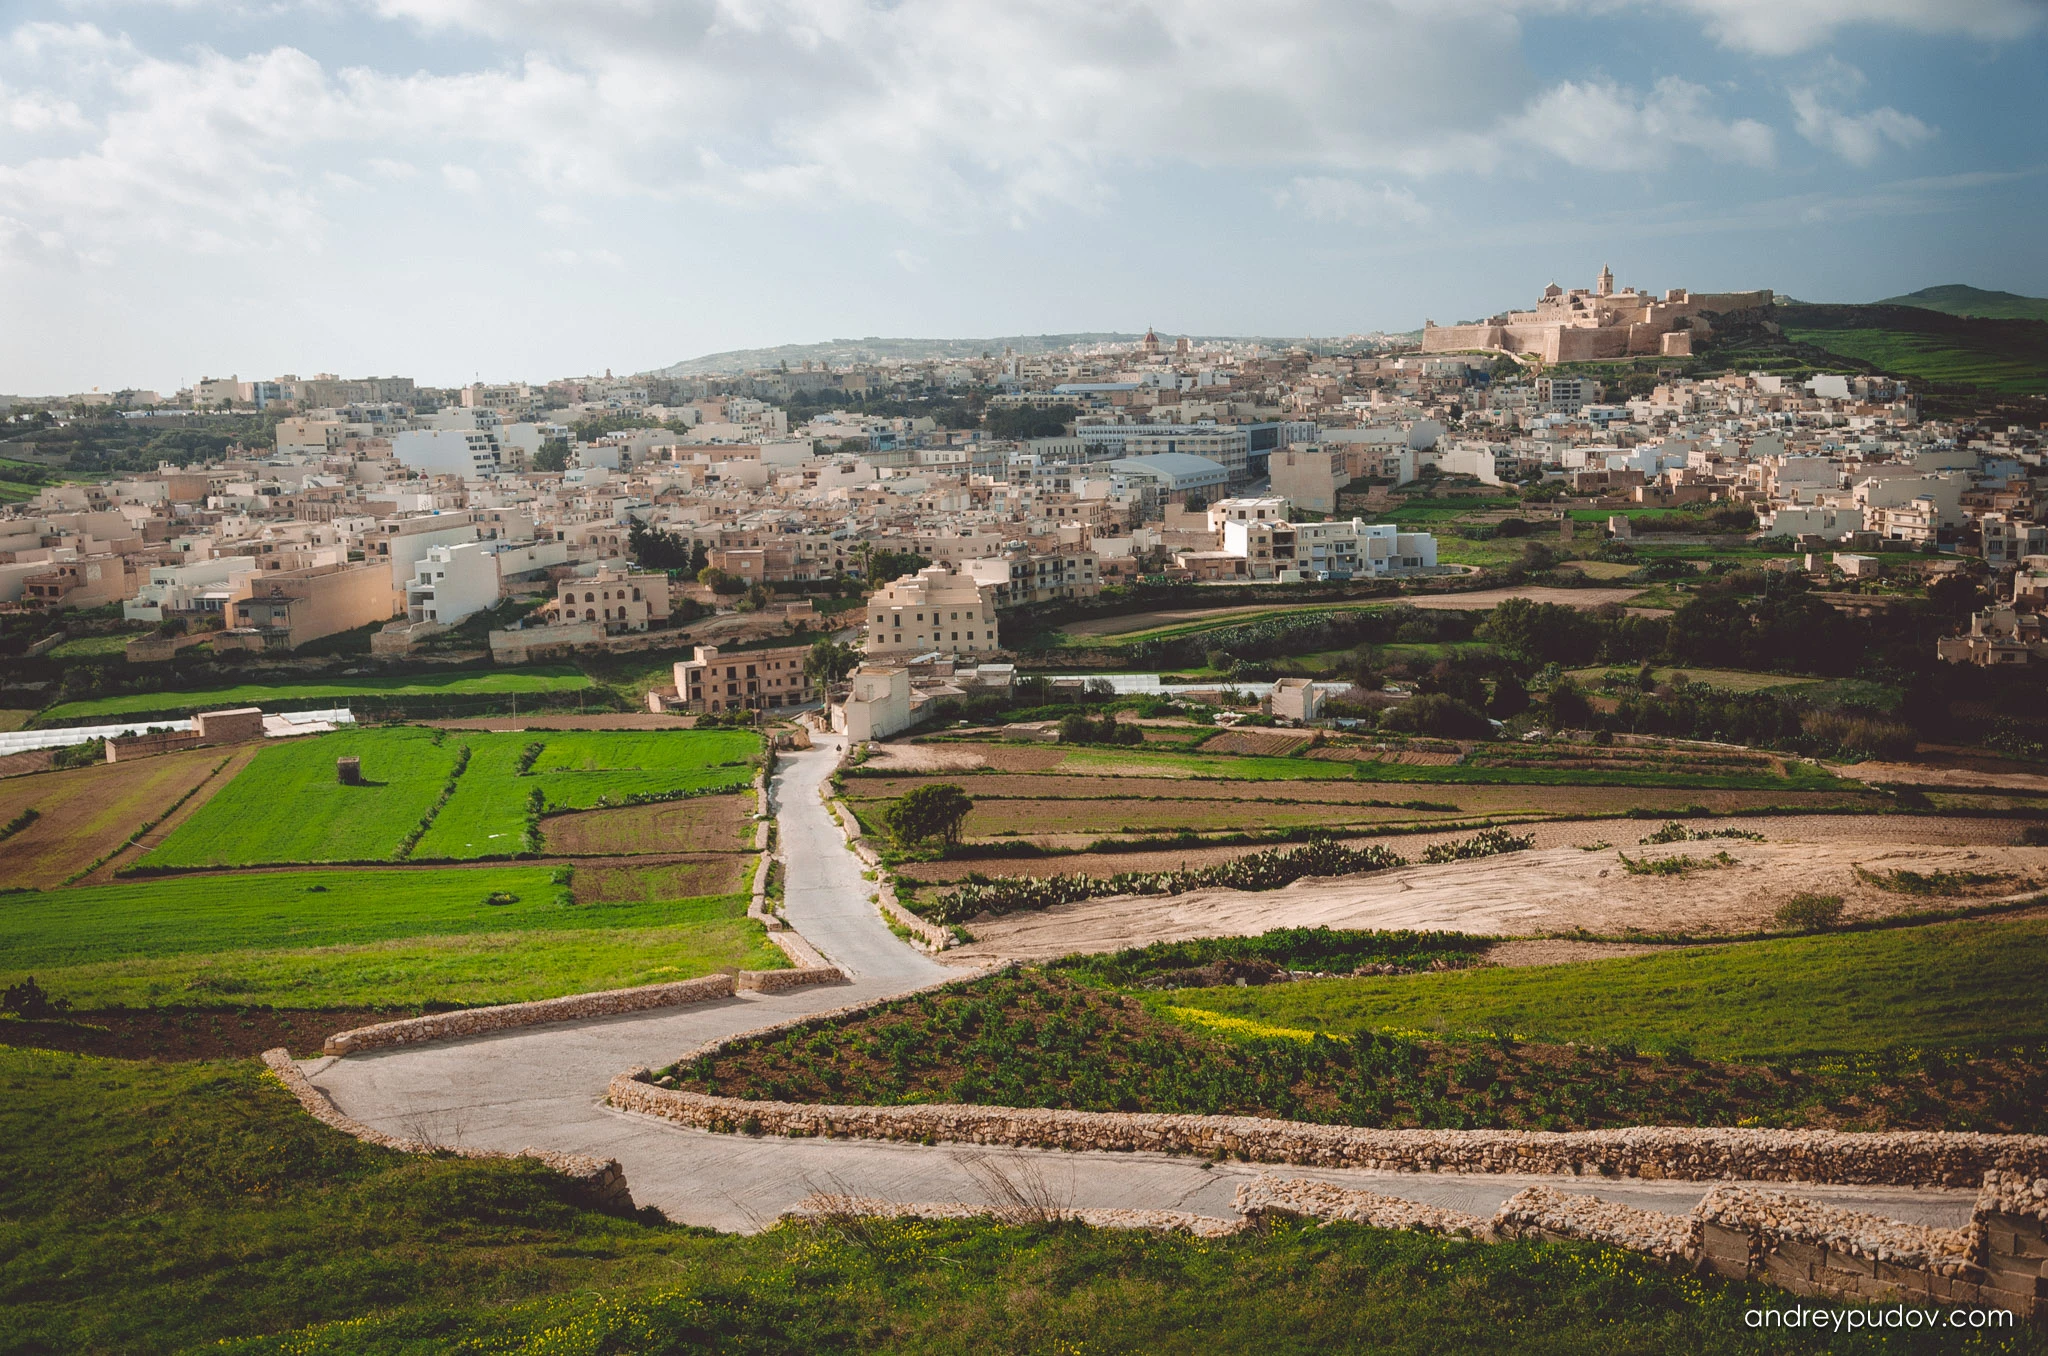 The city was founded as Maleth in around the 8th century BC by Phoenician settlers, and was later renamed Melite by the Romans. Ancient Melite was larger than present-day Mdina, and it was reduced to its present size during the Byzantine or Arab occupation of Malta. During the latter period, the city adopted its present name, which derives from the Arabic word medina. The city remained the capital of Malta throughout the Middle Ages, until the arrival of the Order of St. John in 1530, when Birgu became the administrative centre of the island. Mdina experienced a period of decline over the following centuries, although it saw a revival in the early 18th century. At this point, it acquired several Baroque features, although it did not lose its medieval character. 